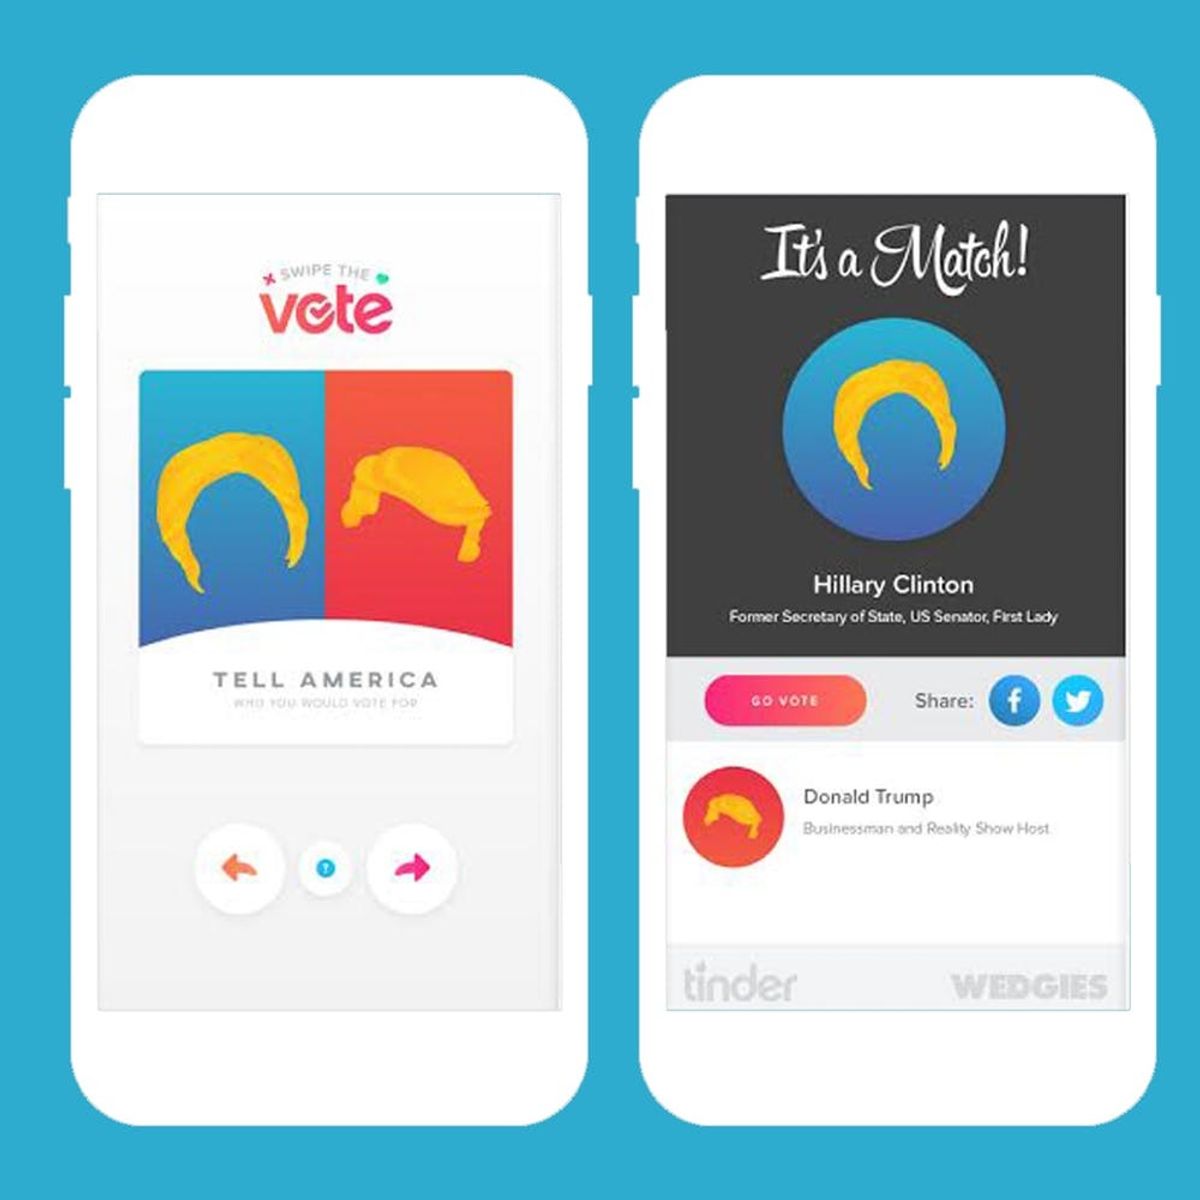 Tinder Wants You to Swipe the Vote